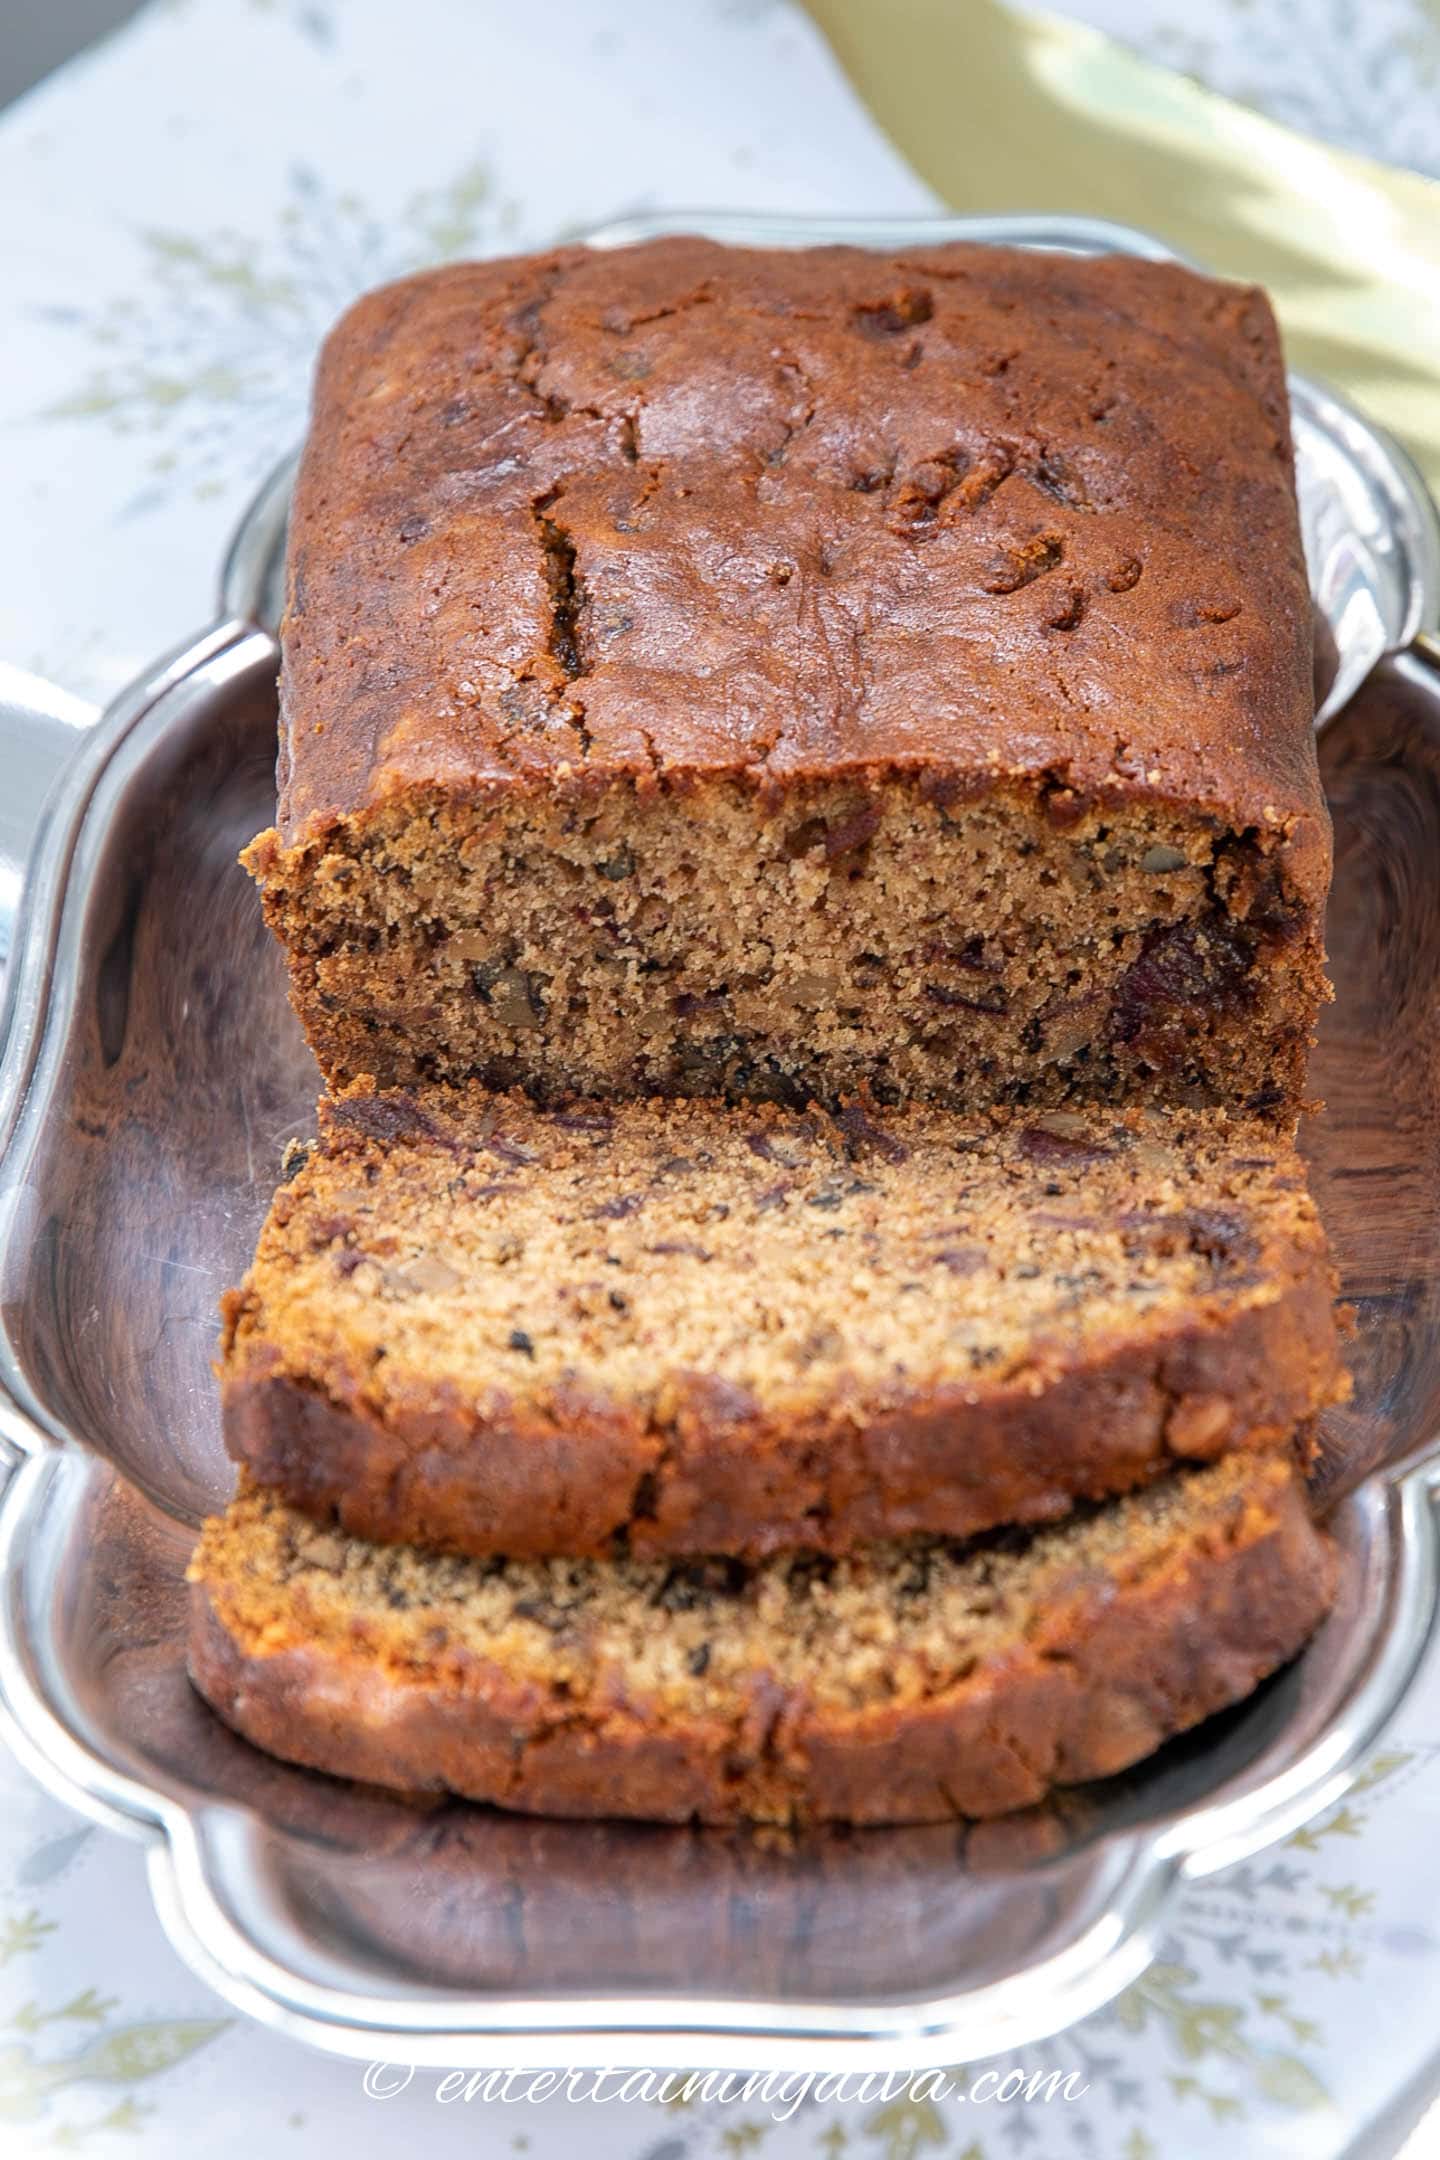 A loaf of old-fashioned date walnut bread sliced